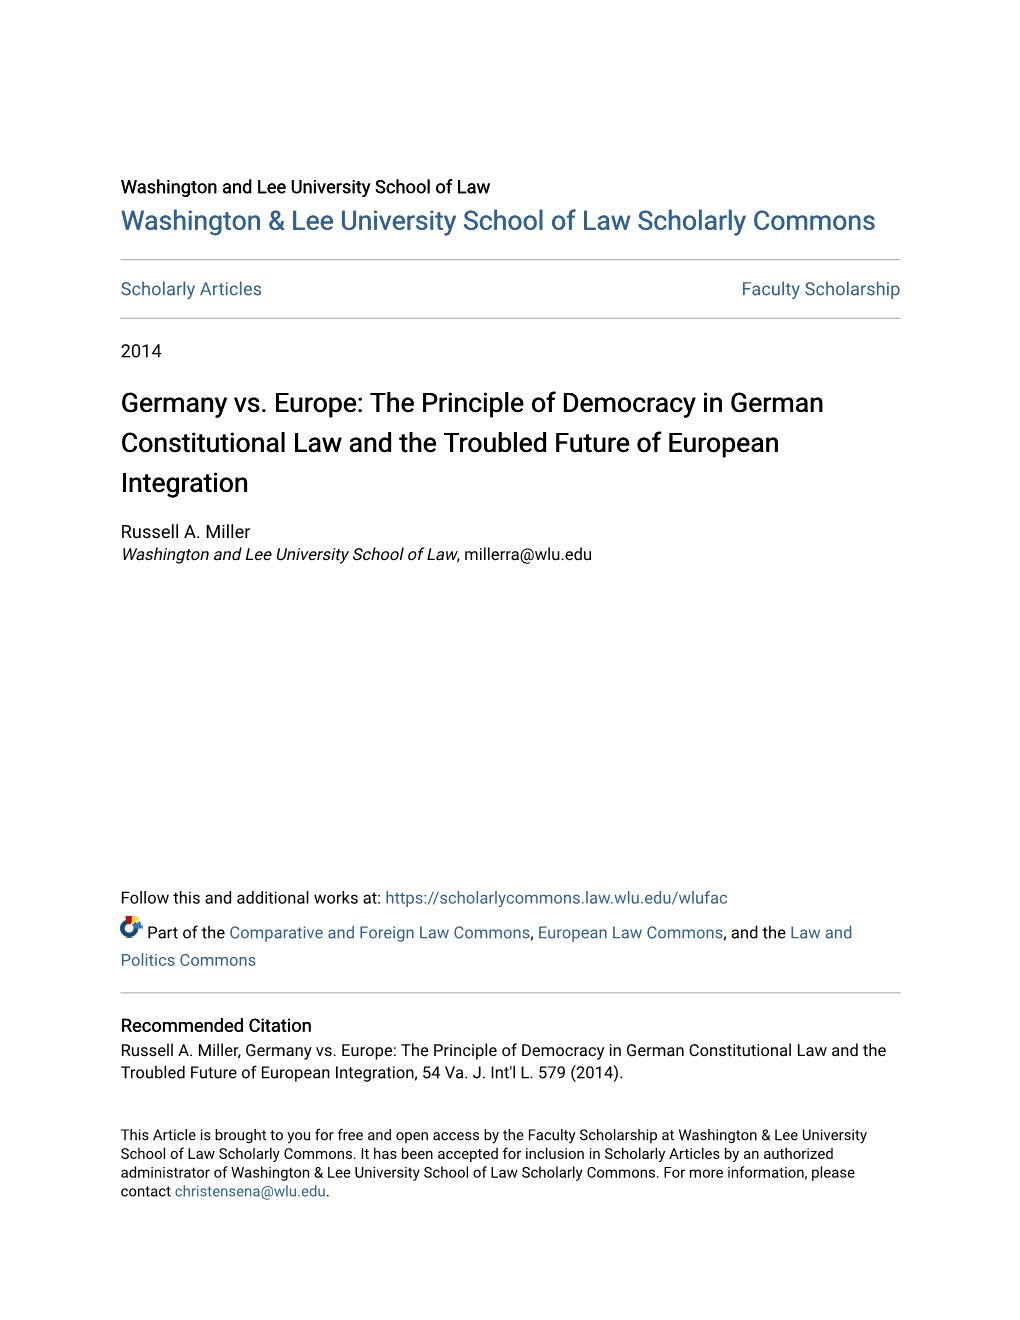 The Principle of Democracy in German Constitutional Law and the Troubled Future of European Integration